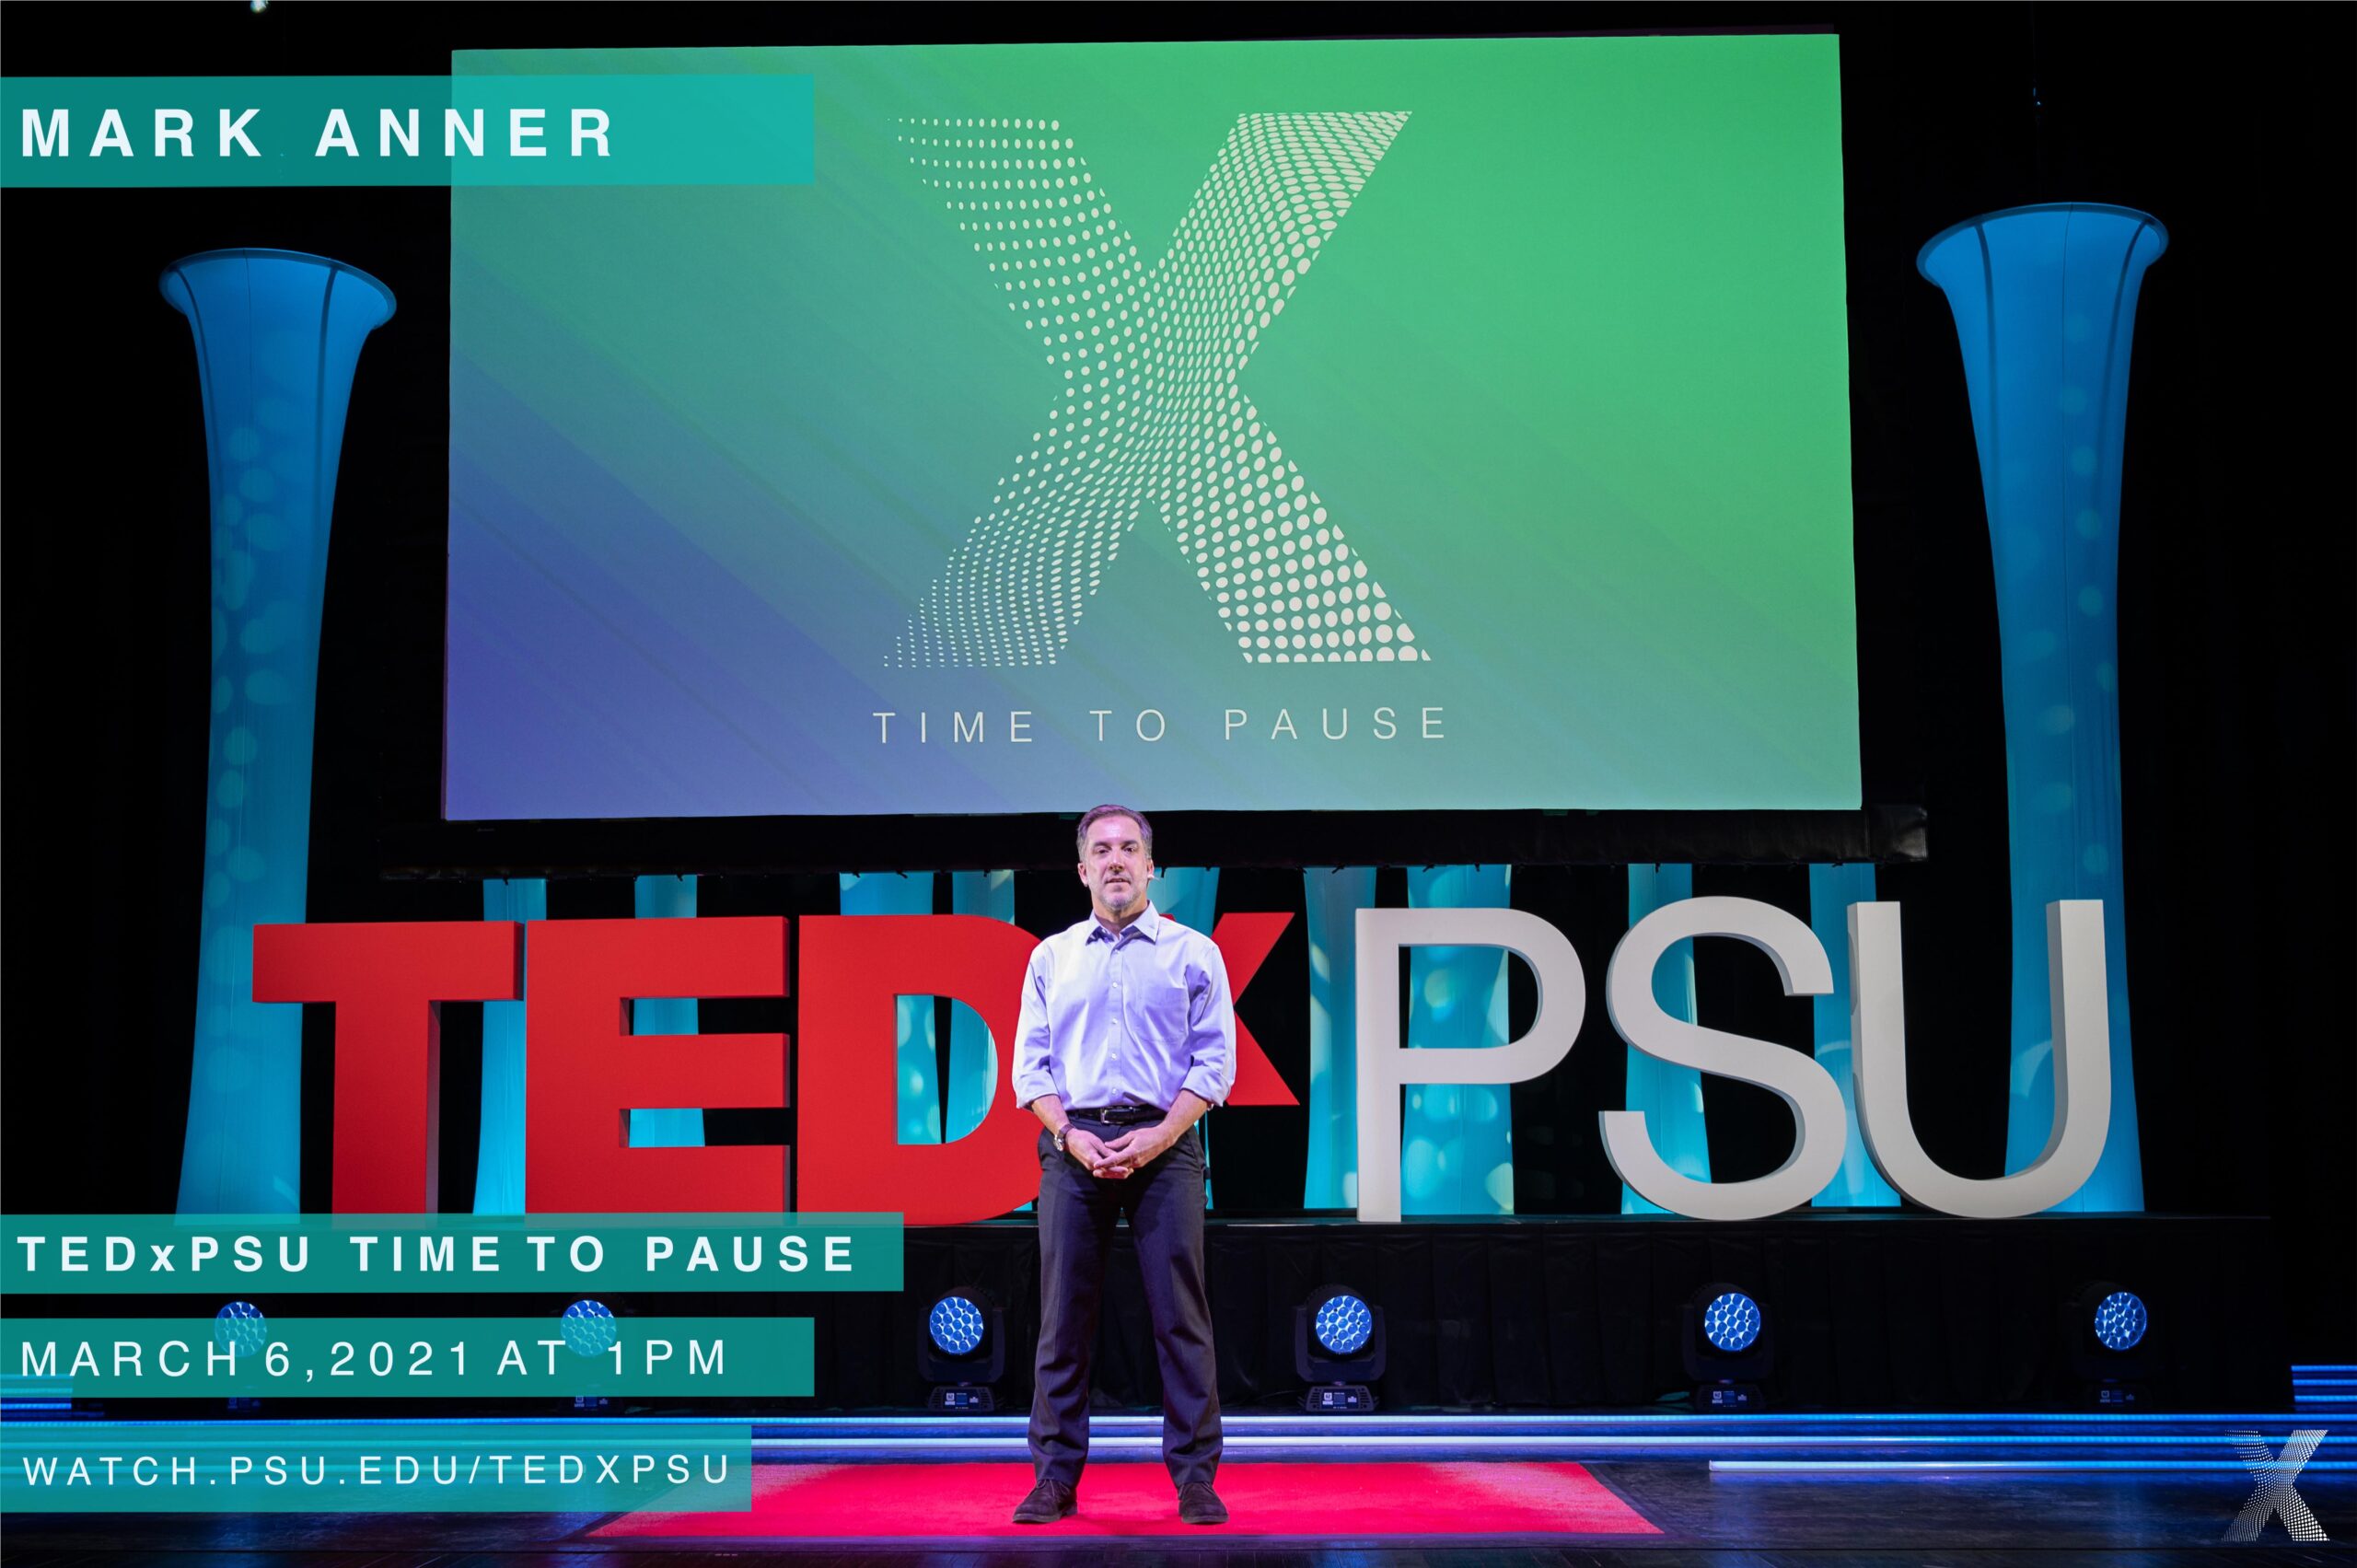 Anner to present at TEDxPSU Conference